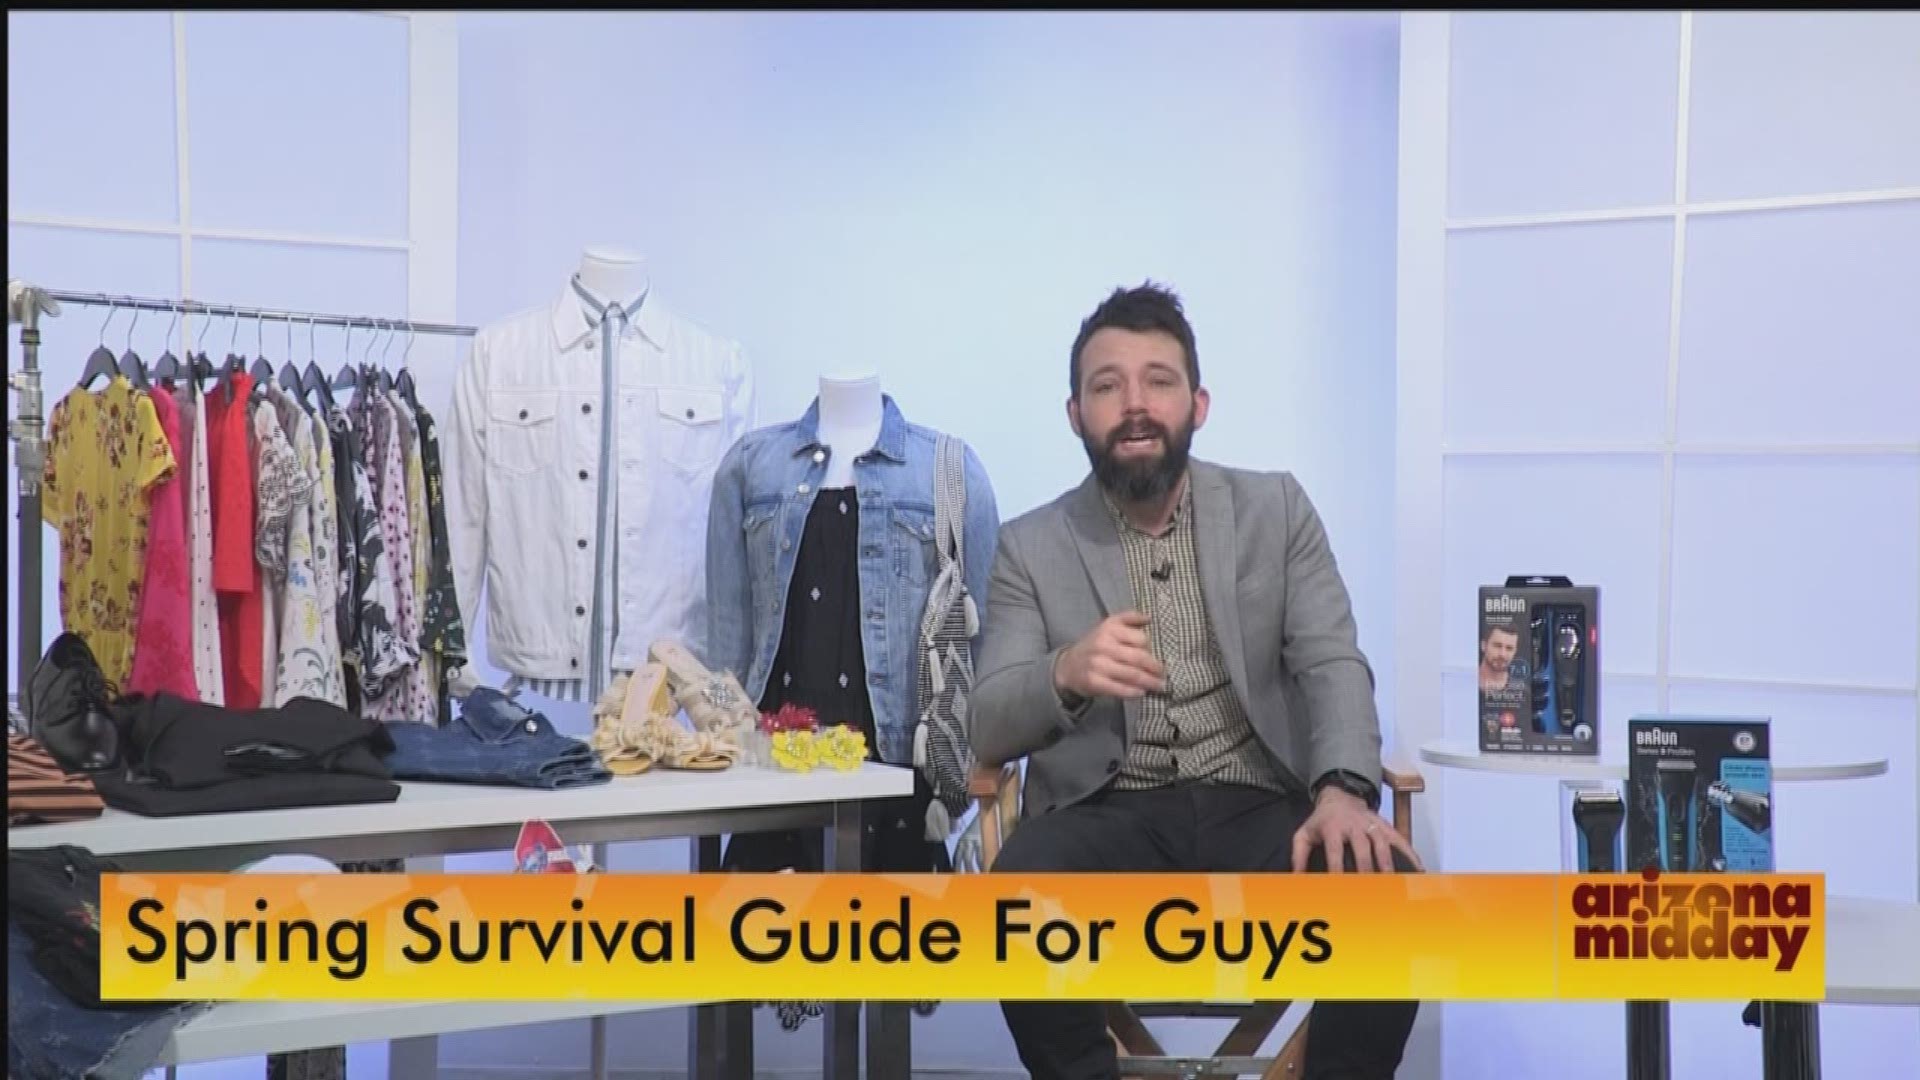 Springtime is here and Clint Carter shares his tips for how men can stay trendy this season.